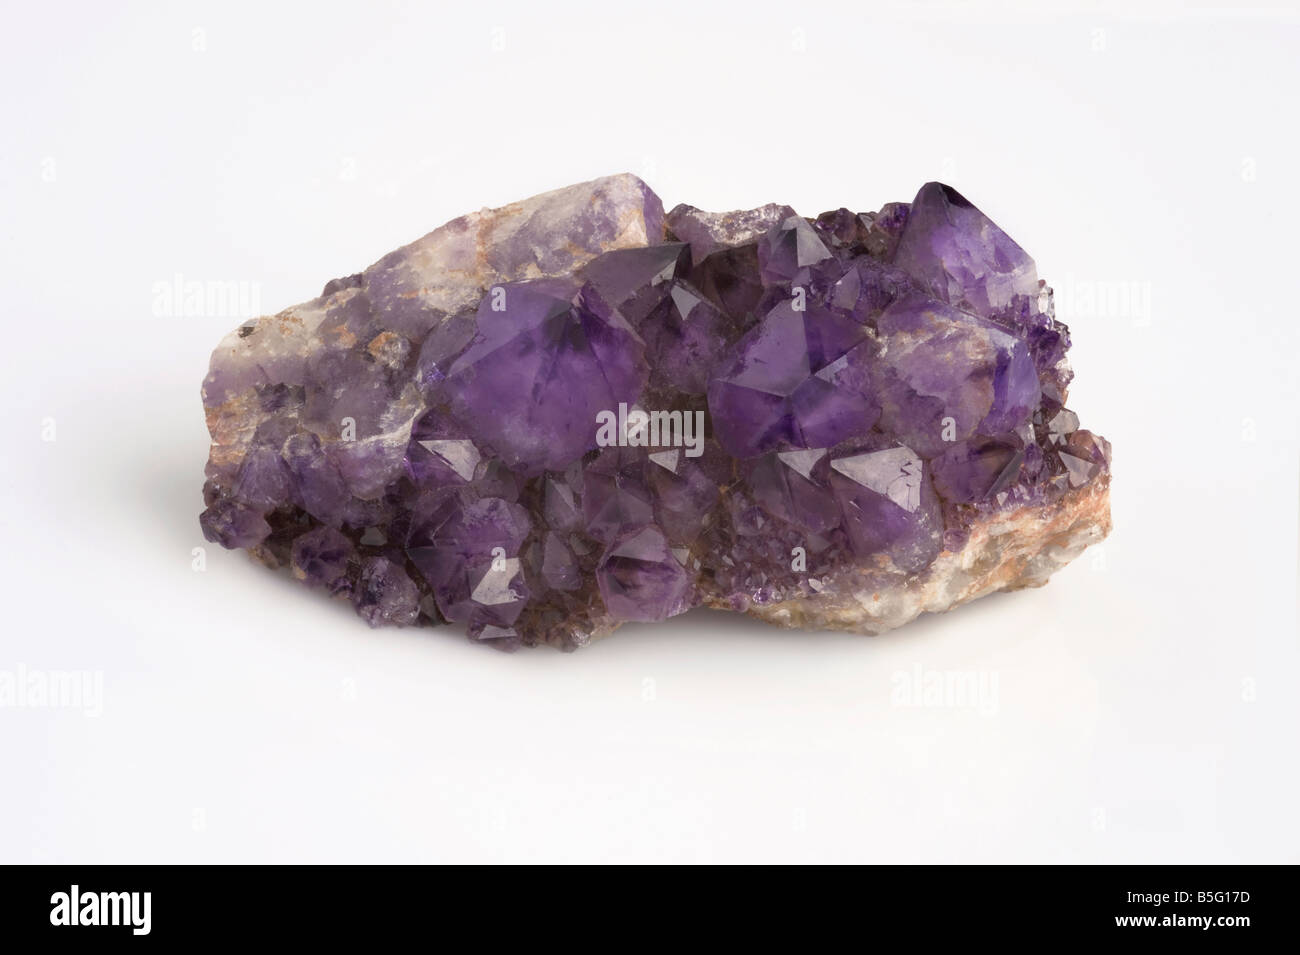 Amethyst crystal cluster on white background Stock Photo